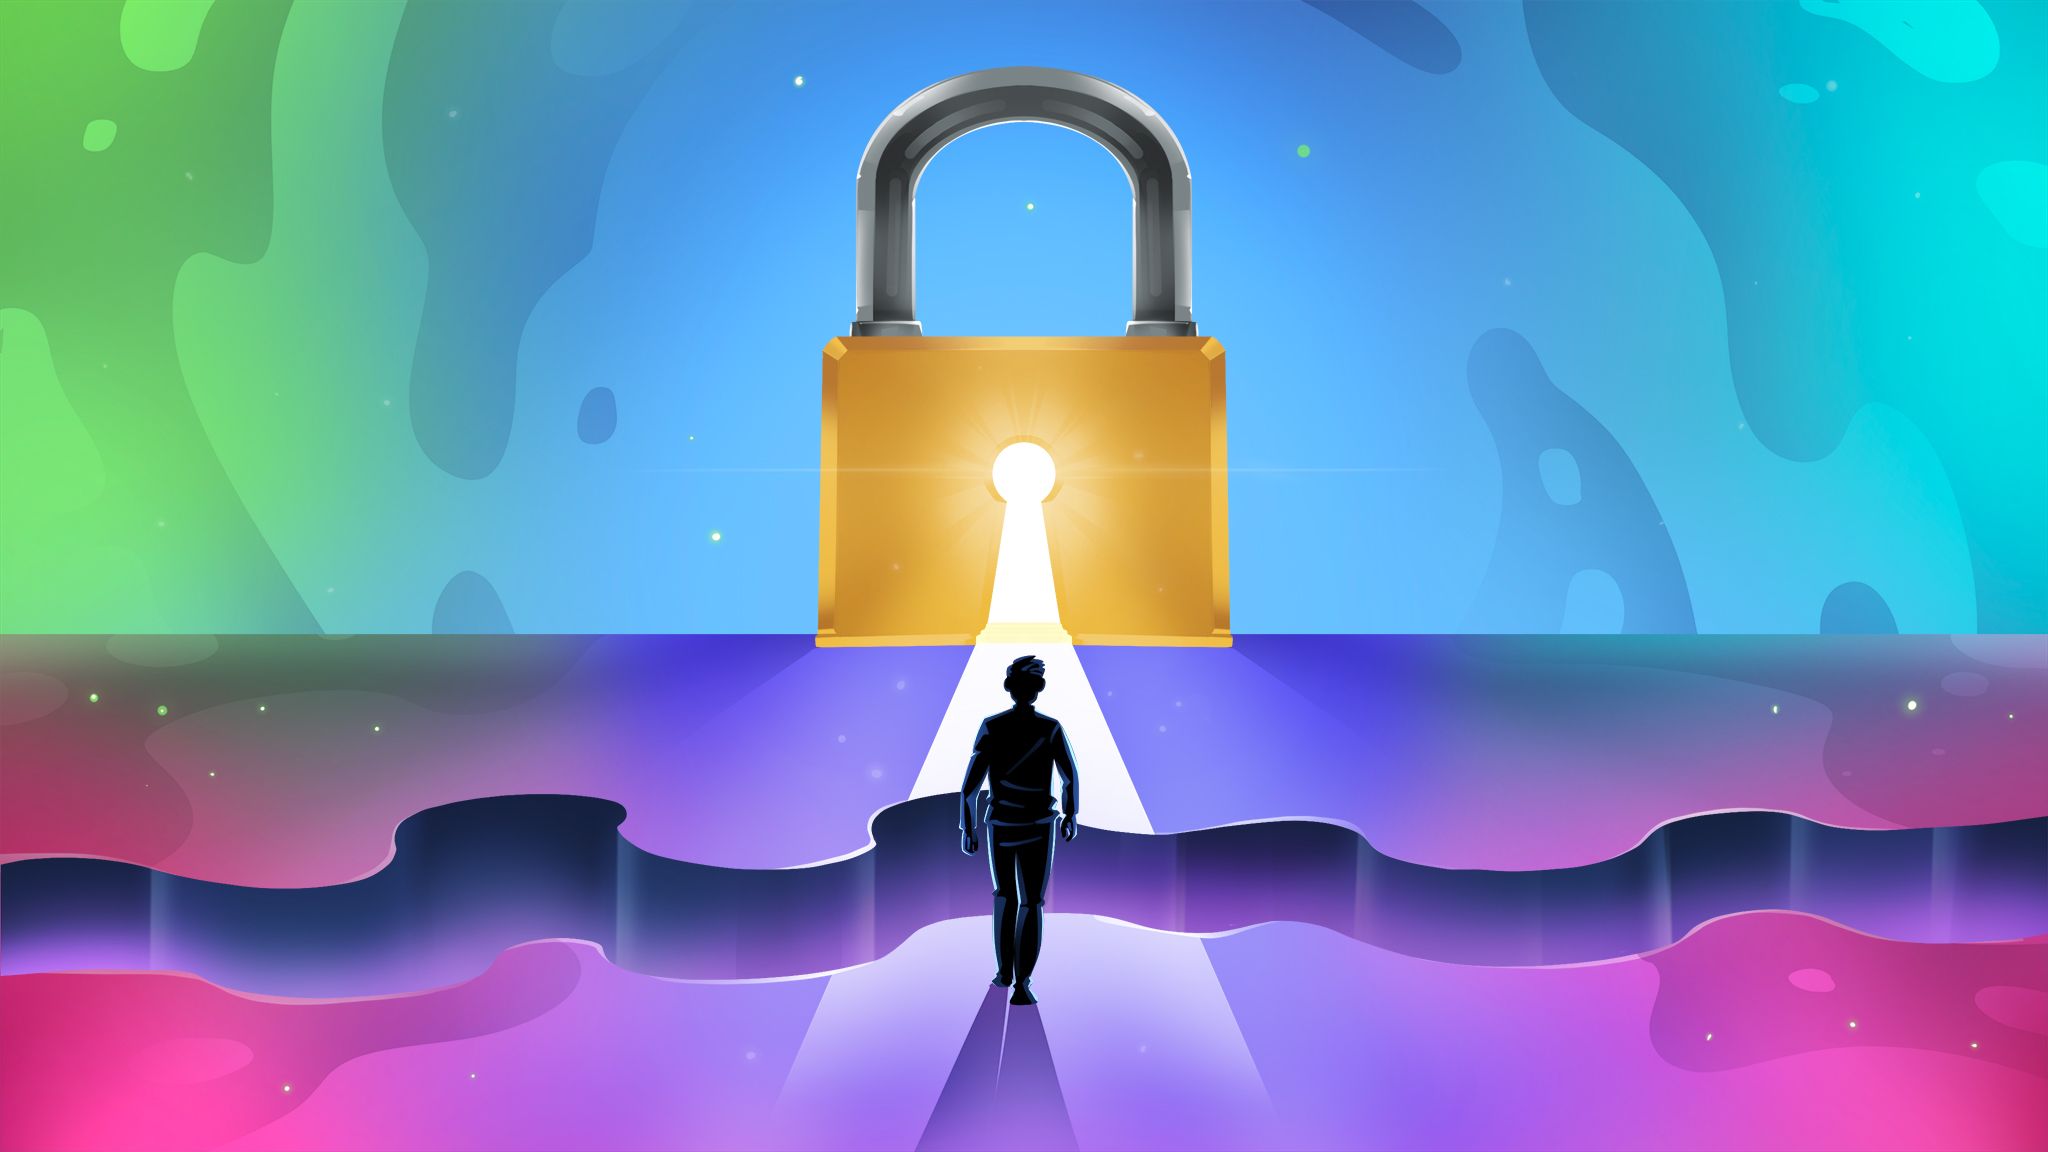 Building Safe End-to-End Encrypted Services for Business - a Google Workspace perspective